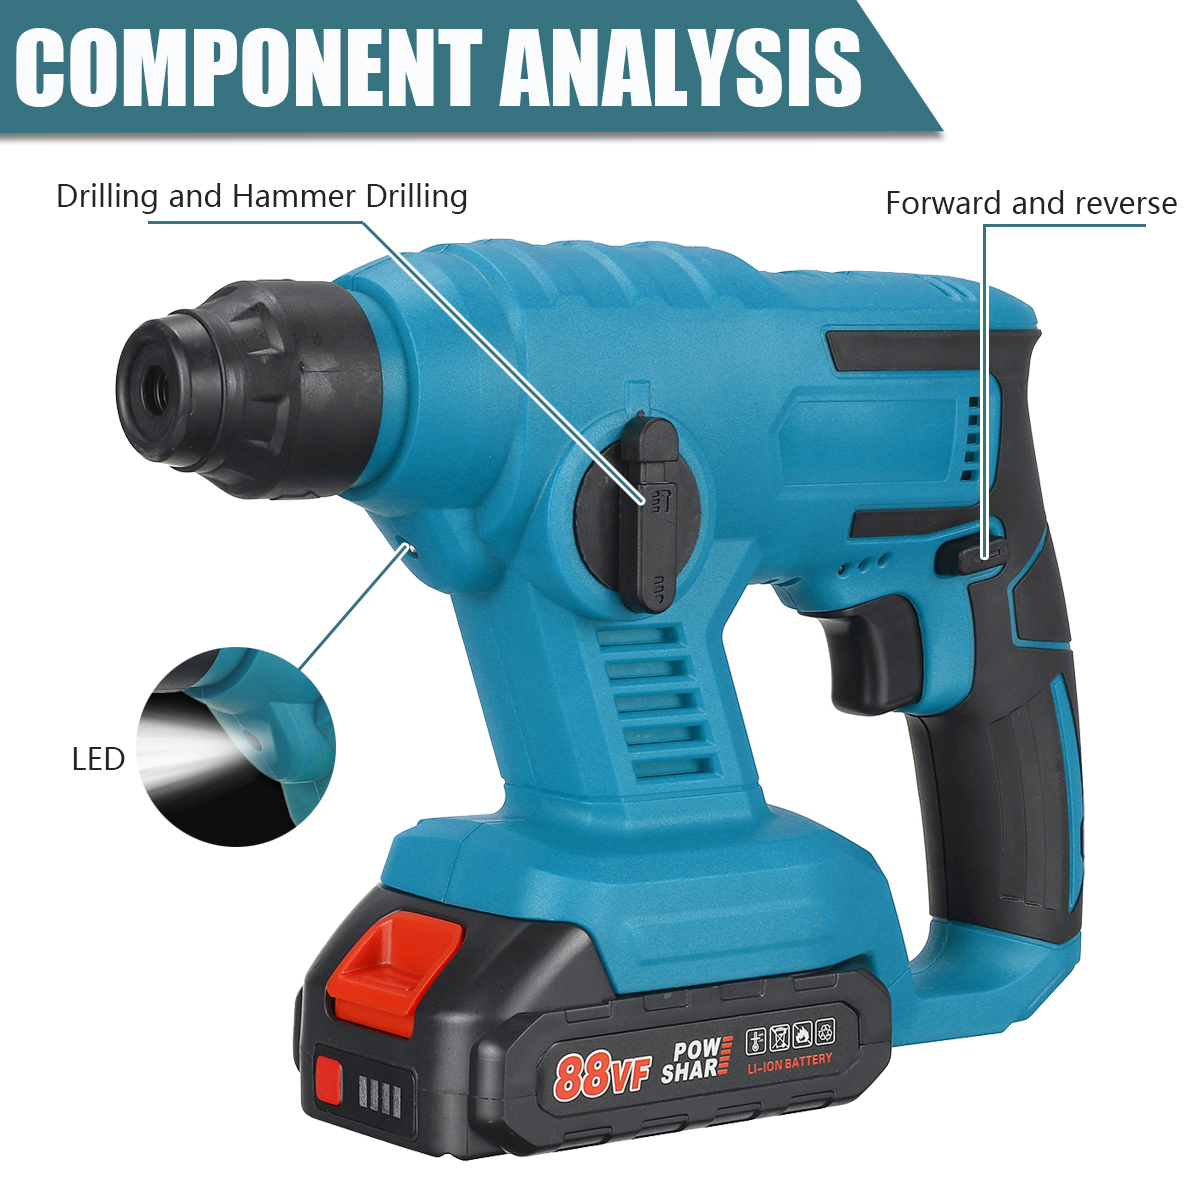 88VF-1800rpm-Cordless-Brushless-Rotary-Hammer-Drill-Fit-18VMakita-Battery-1943502-7